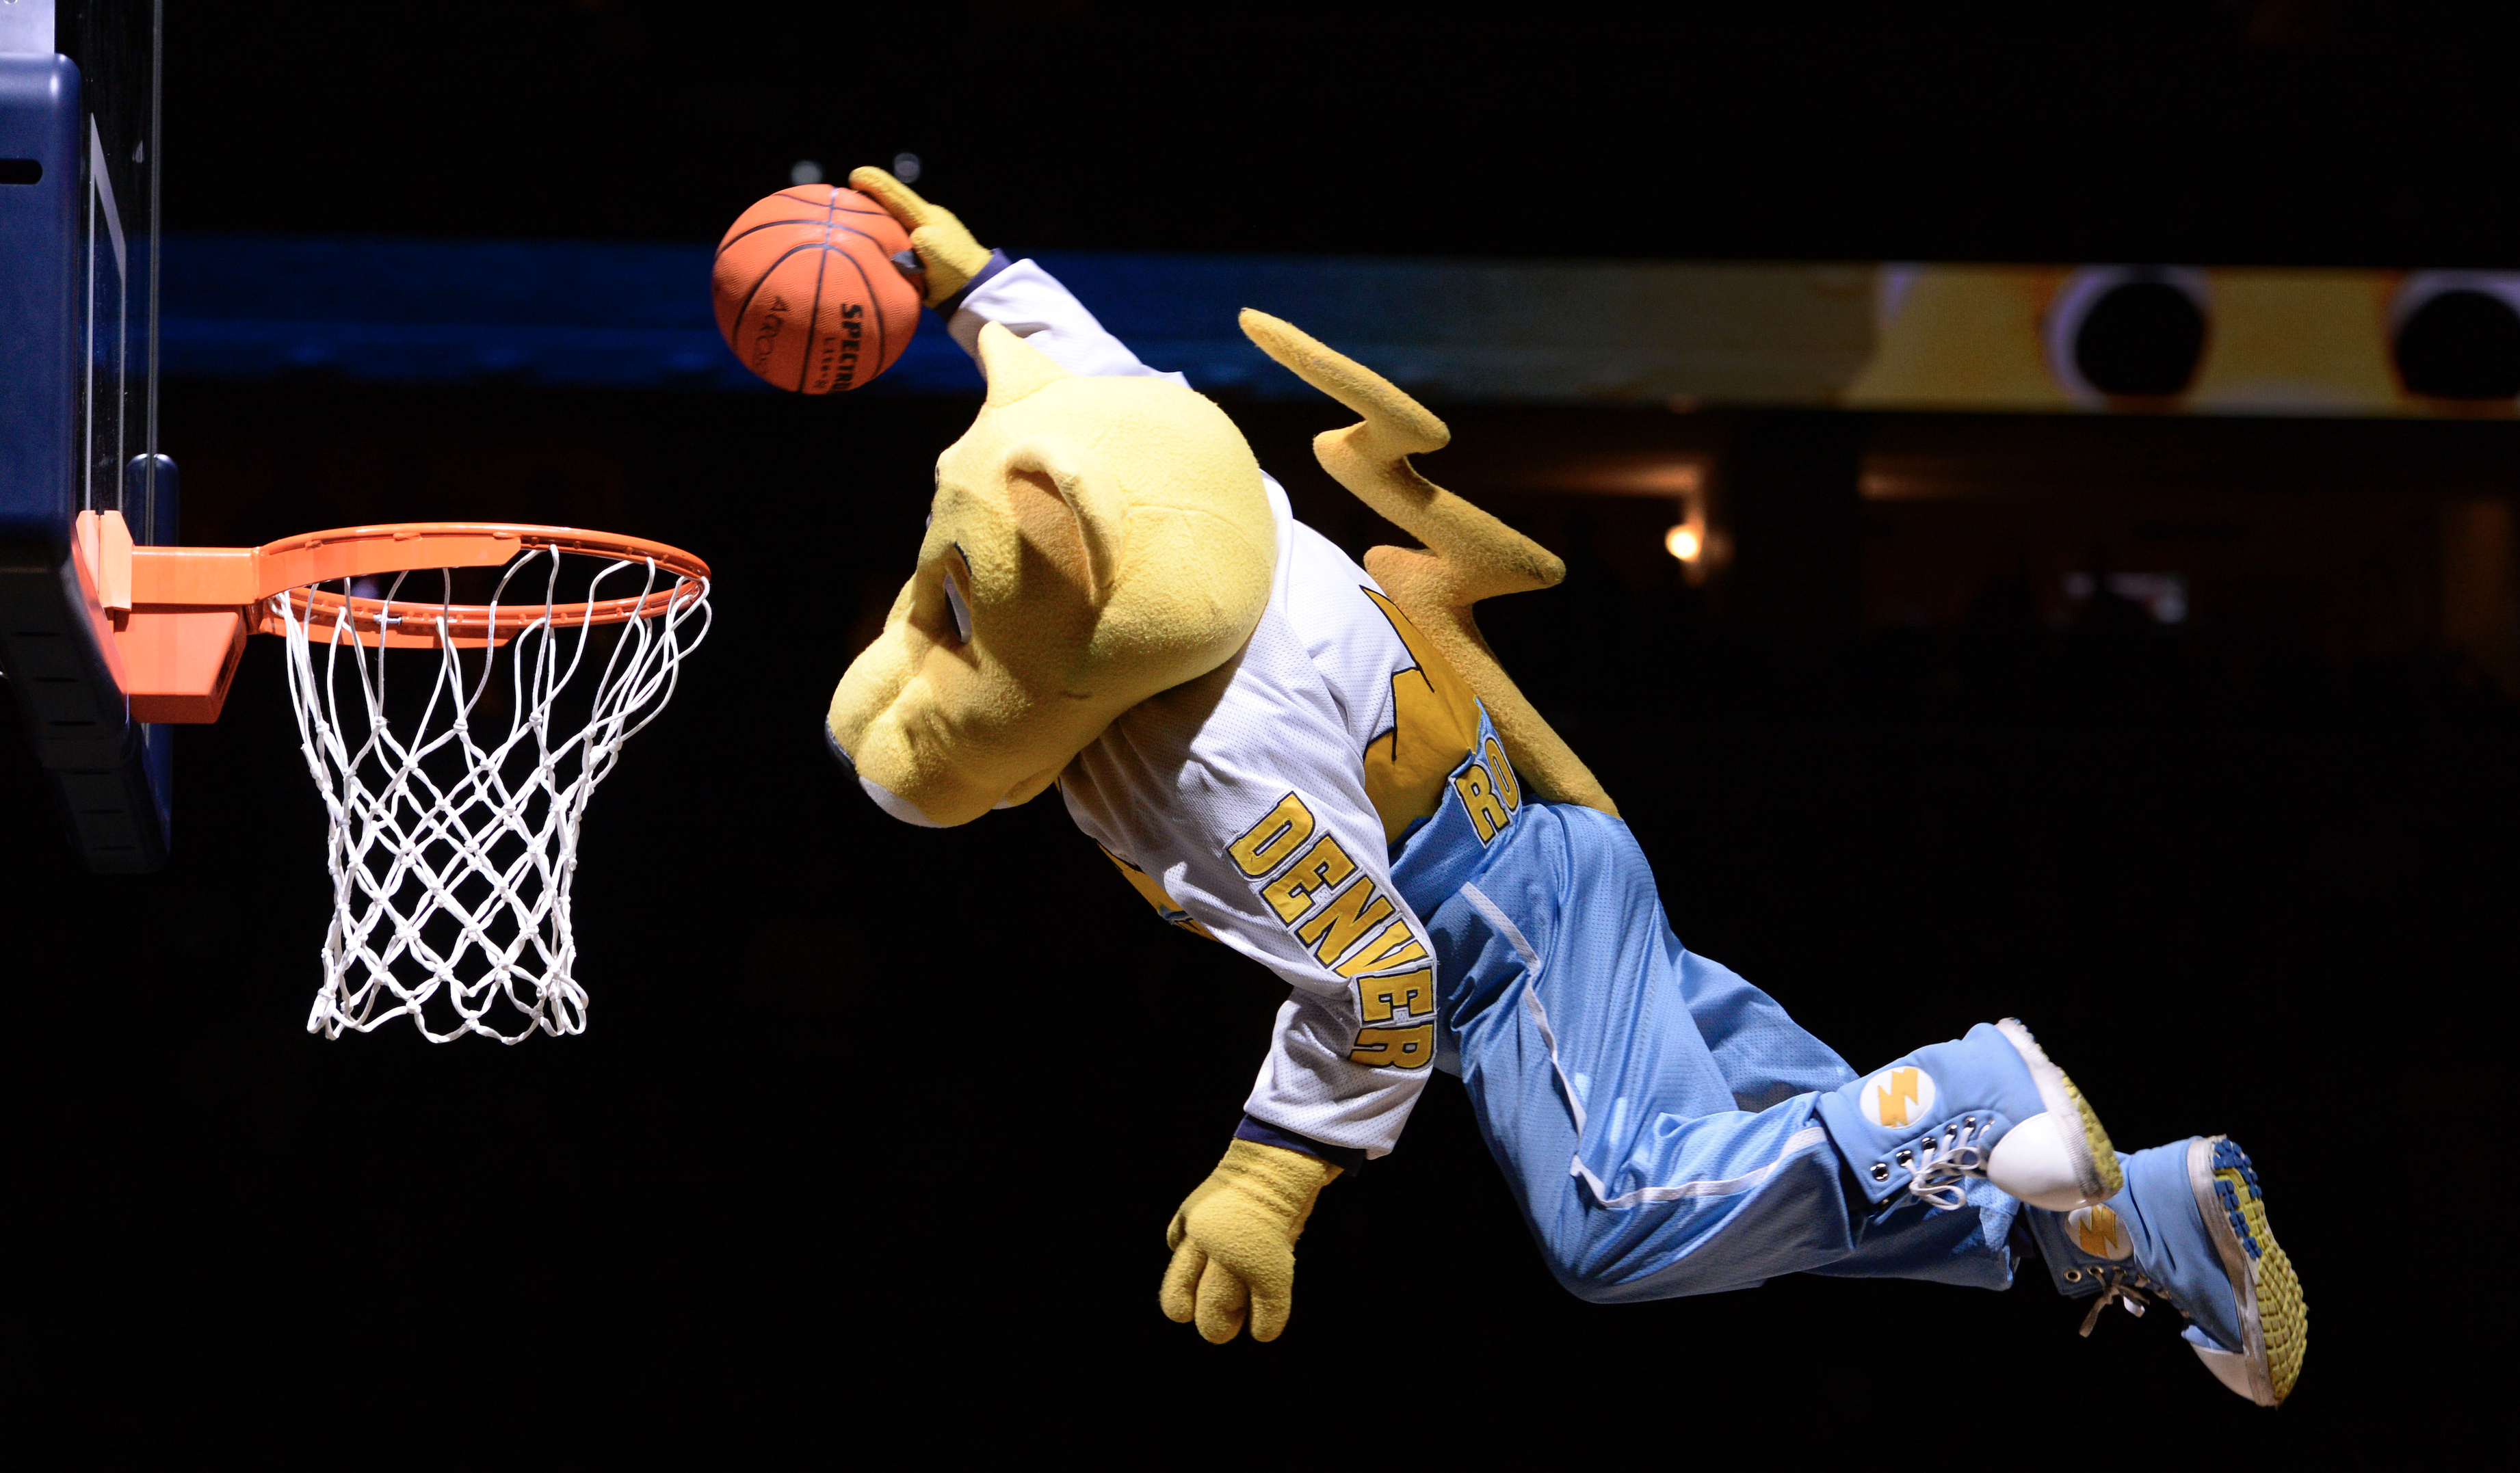 Top 5 NBA mascots ranked by salaries, featuring the Denver Nuggets